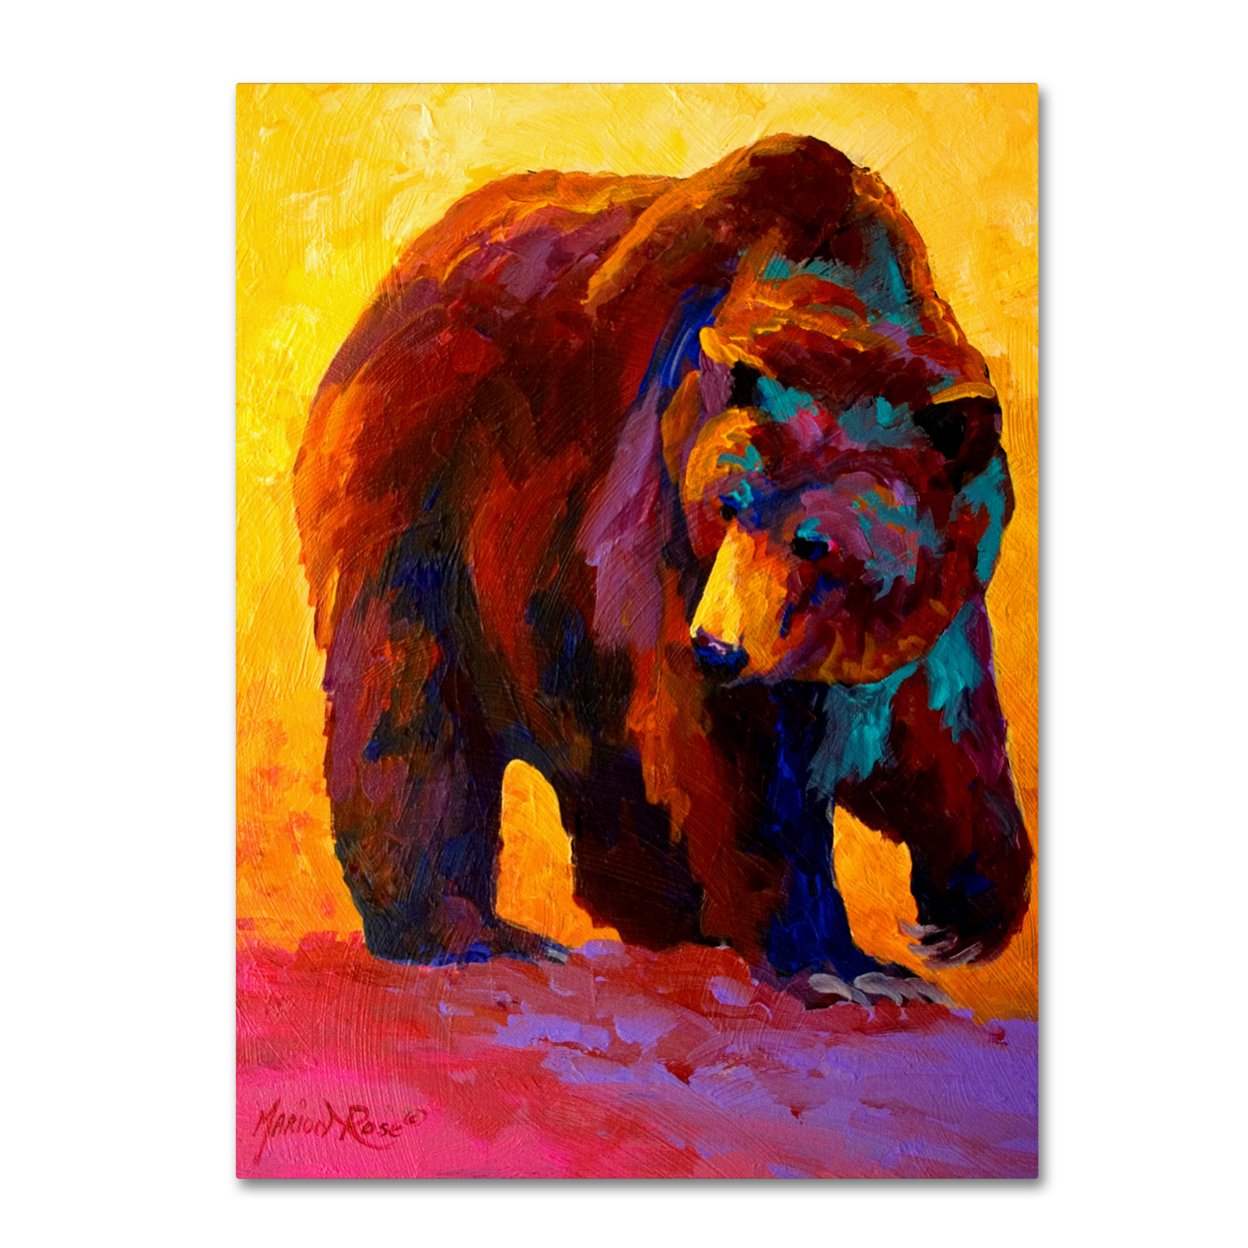 Marion Rose 'My Fish Grizz' Ready To Hang Canvas Art 18 X 24 Inches Made In USA